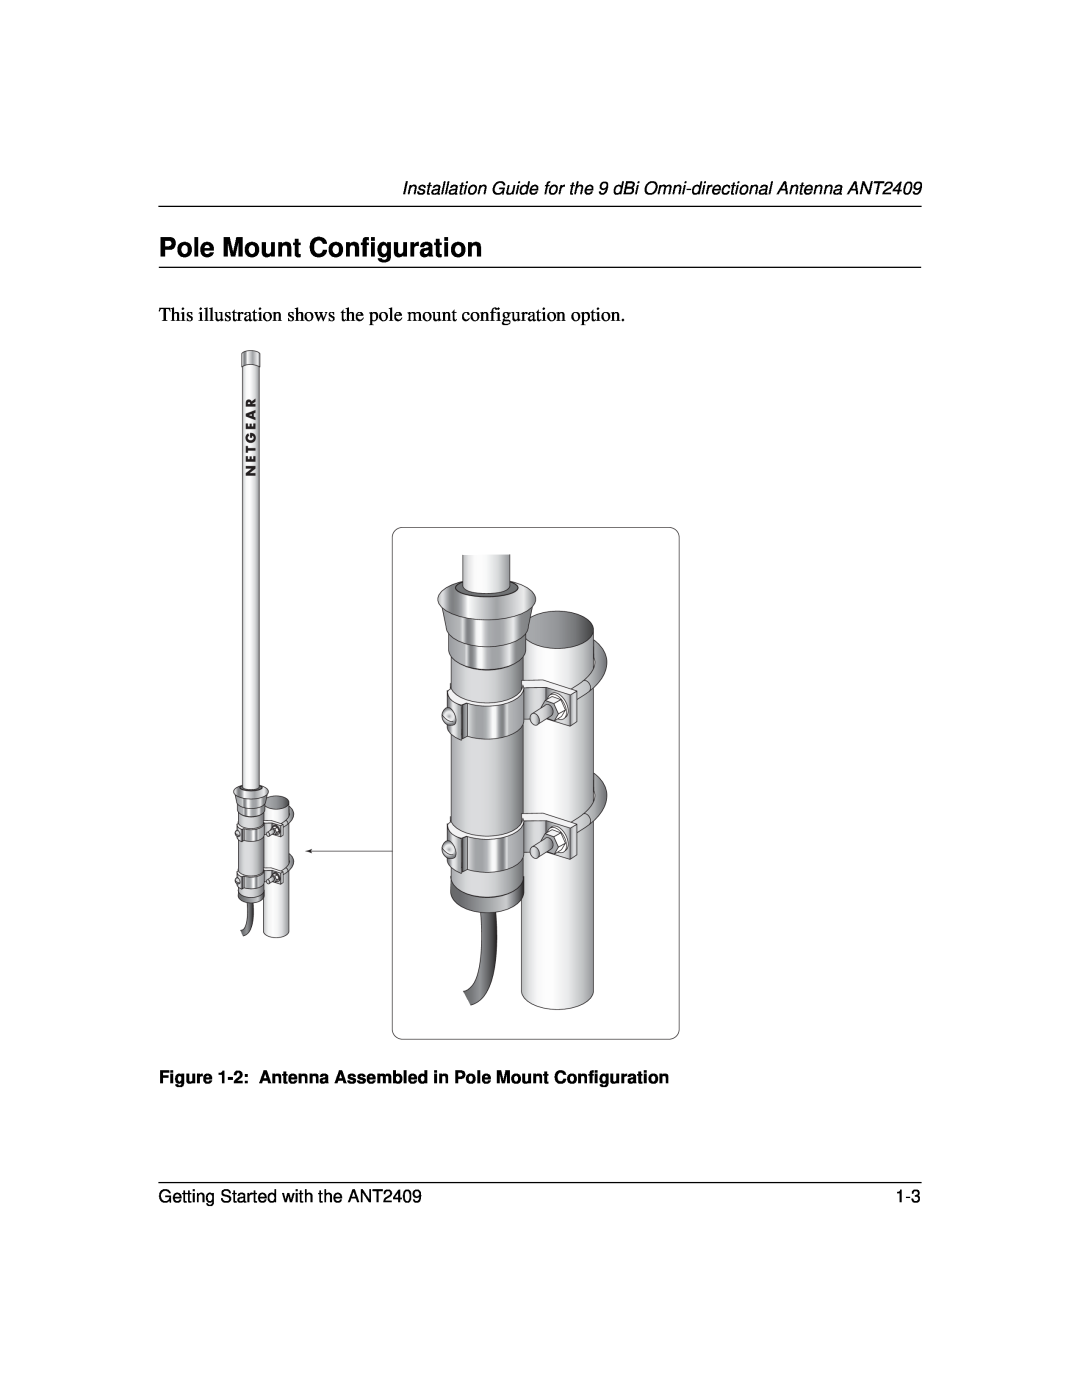 NETGEAR manual Pole Mount Configuration, Getting Started with the ANT2409 